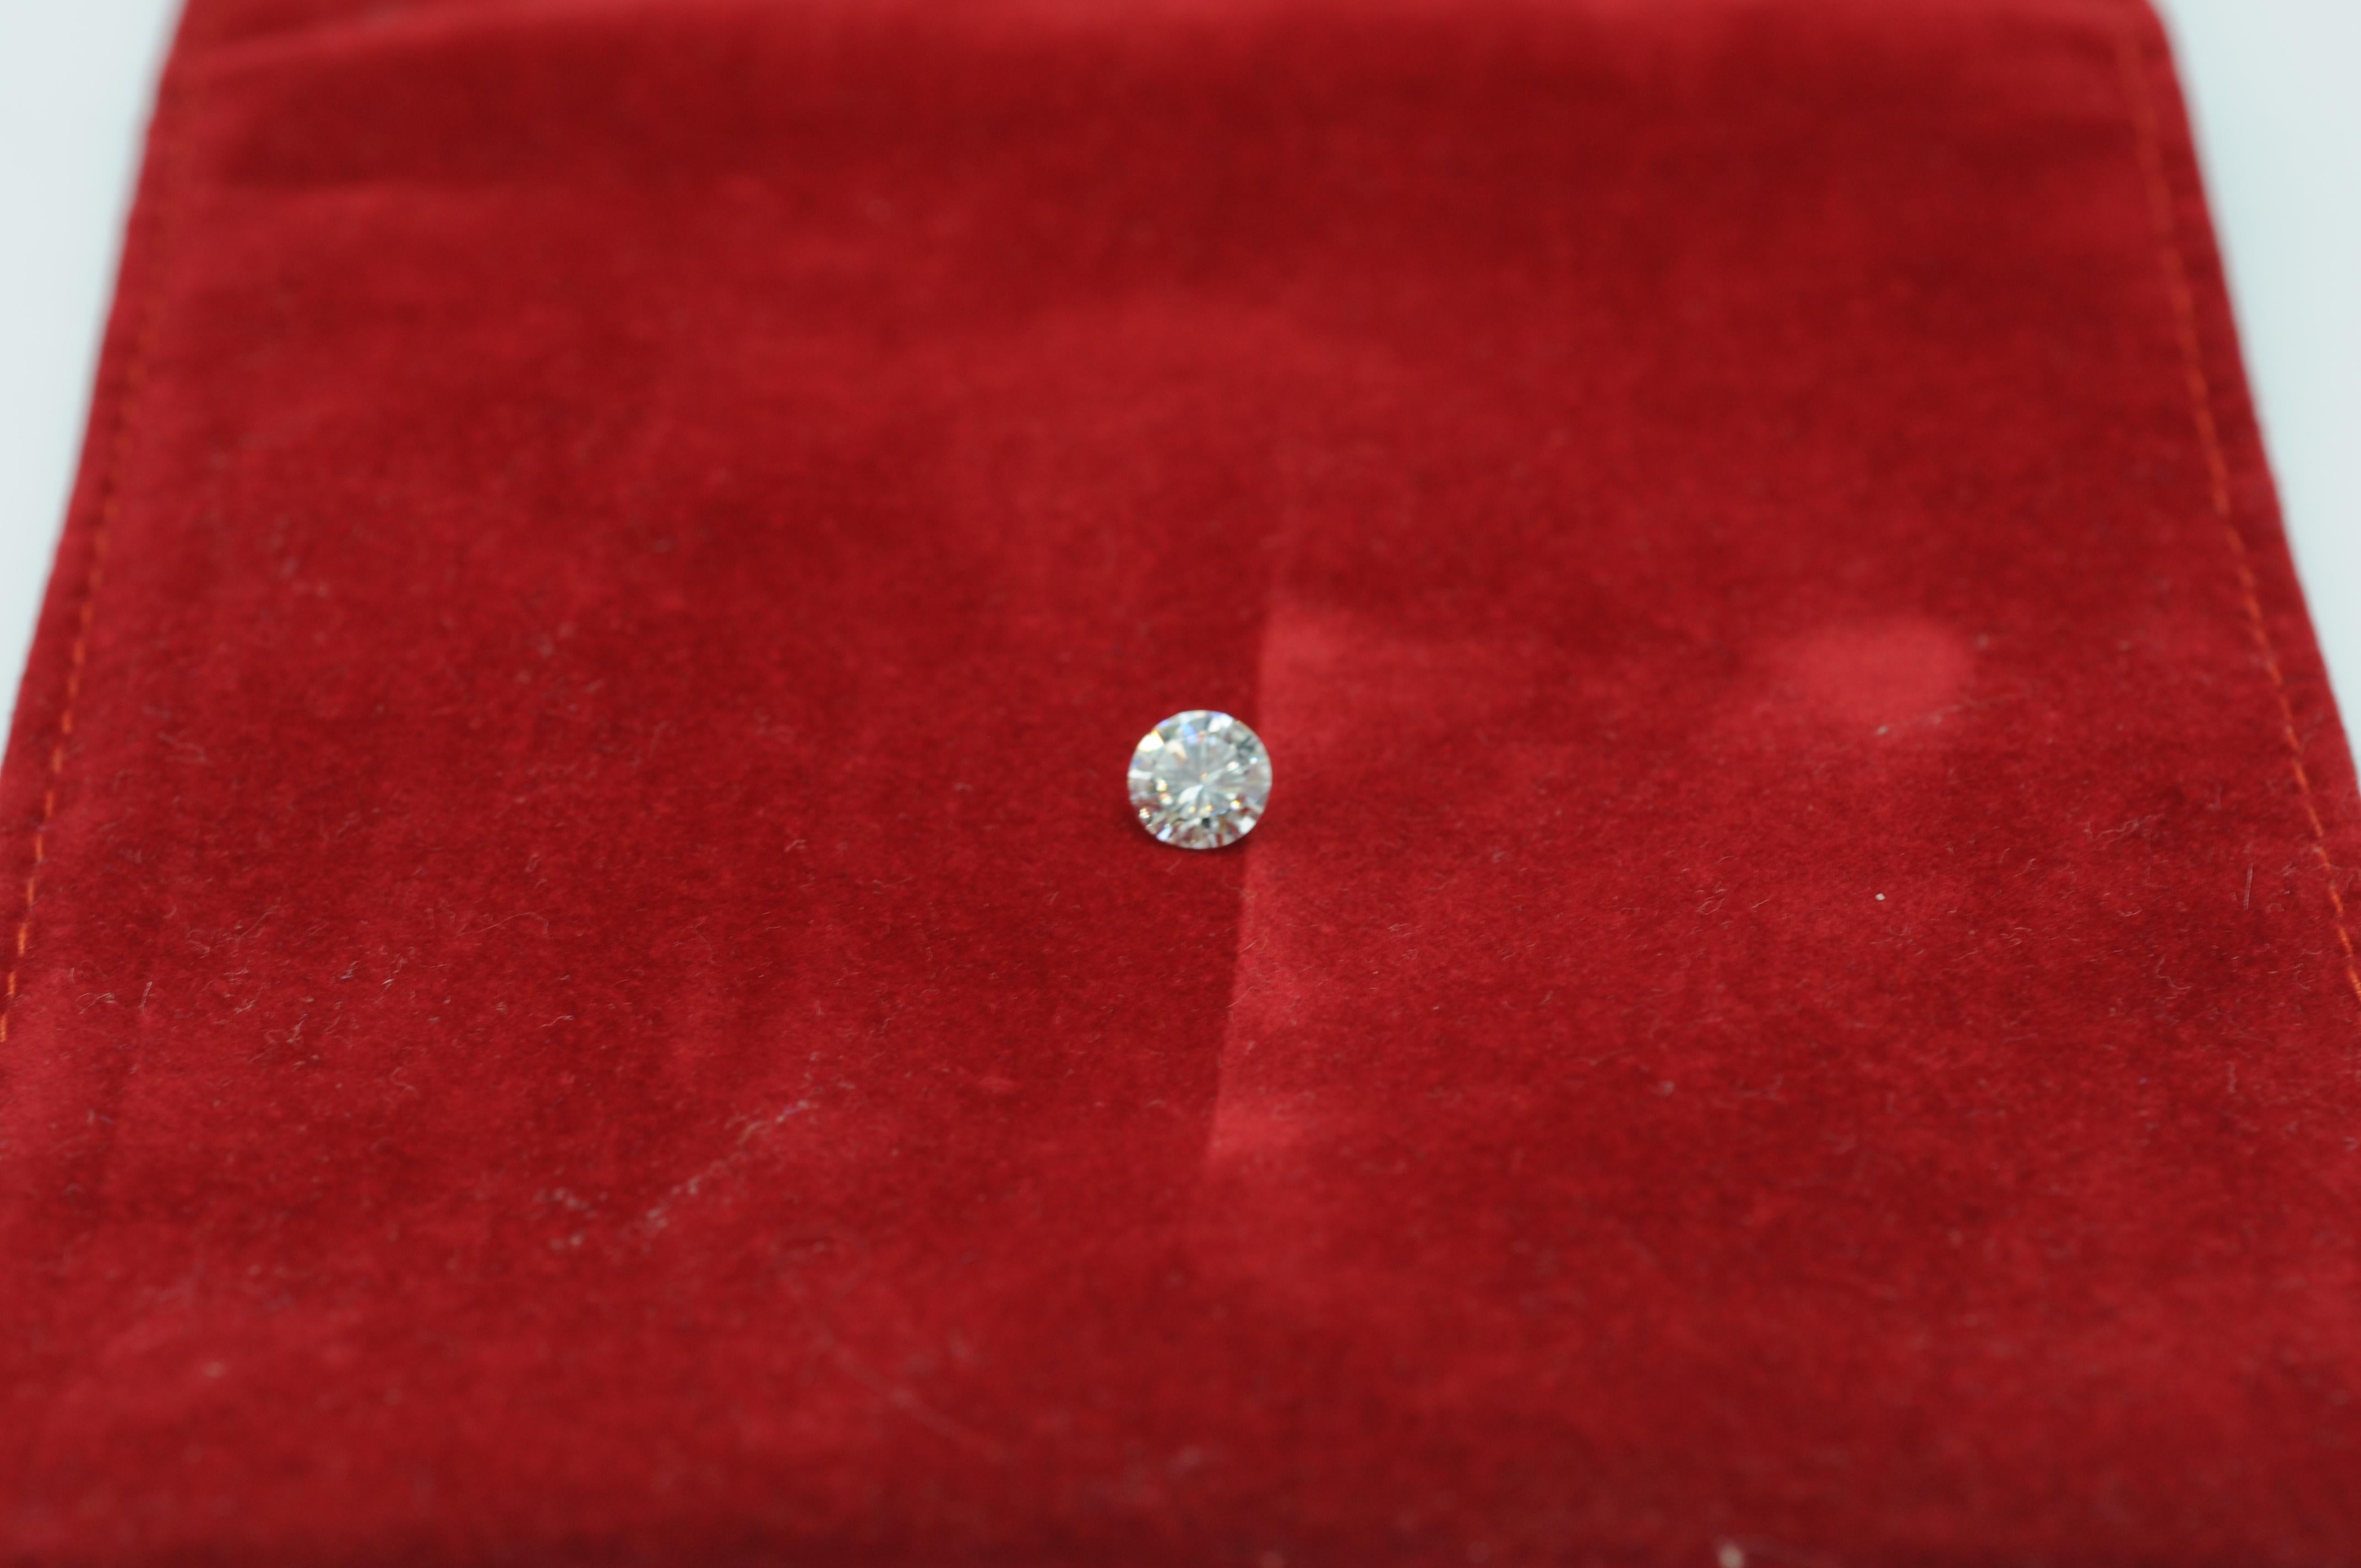  Diamond clarity:(IF) internally flawless color: top wesselton 1.06ct For Sale 1